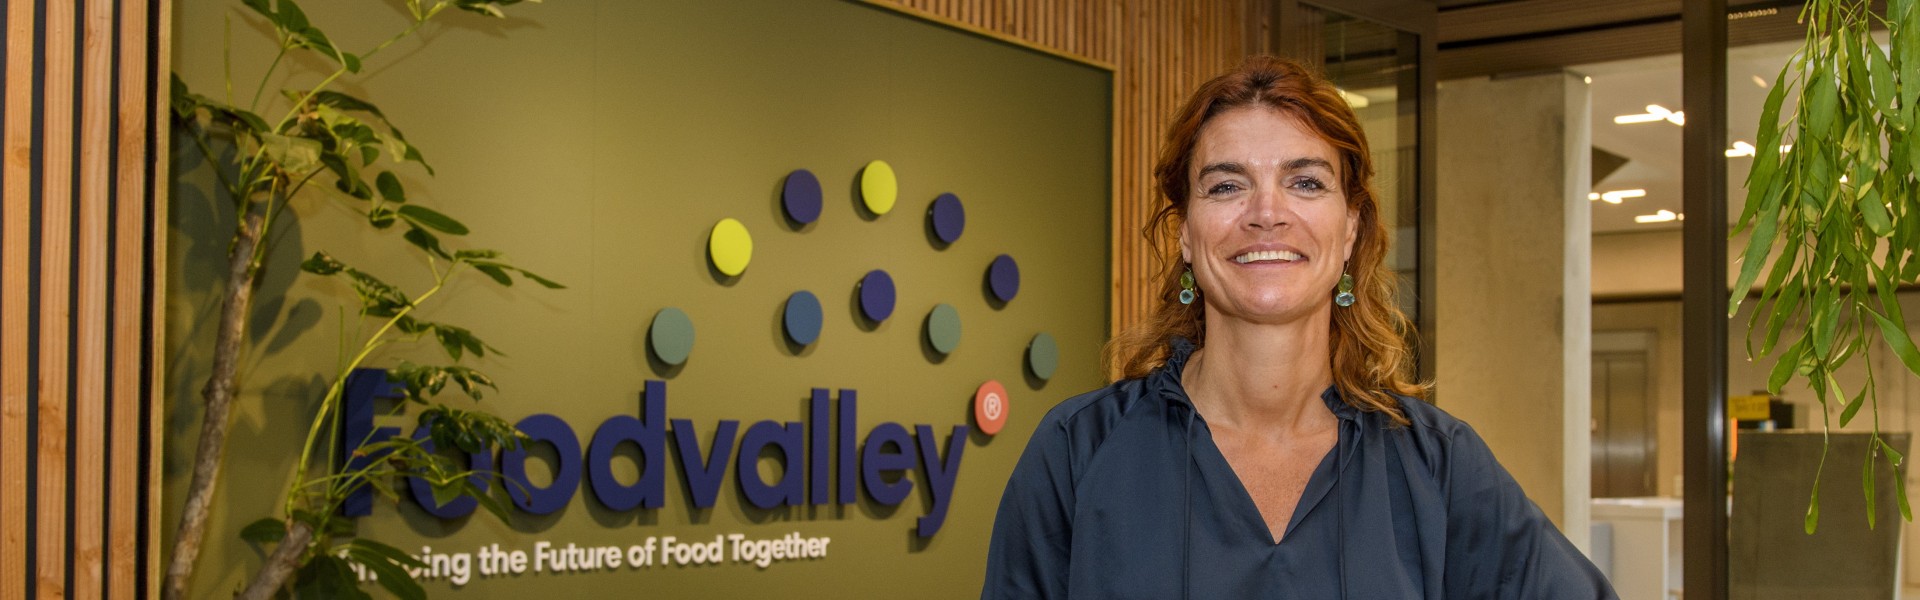 Foodvalley NL | Interview Fortify business magazine by NLO